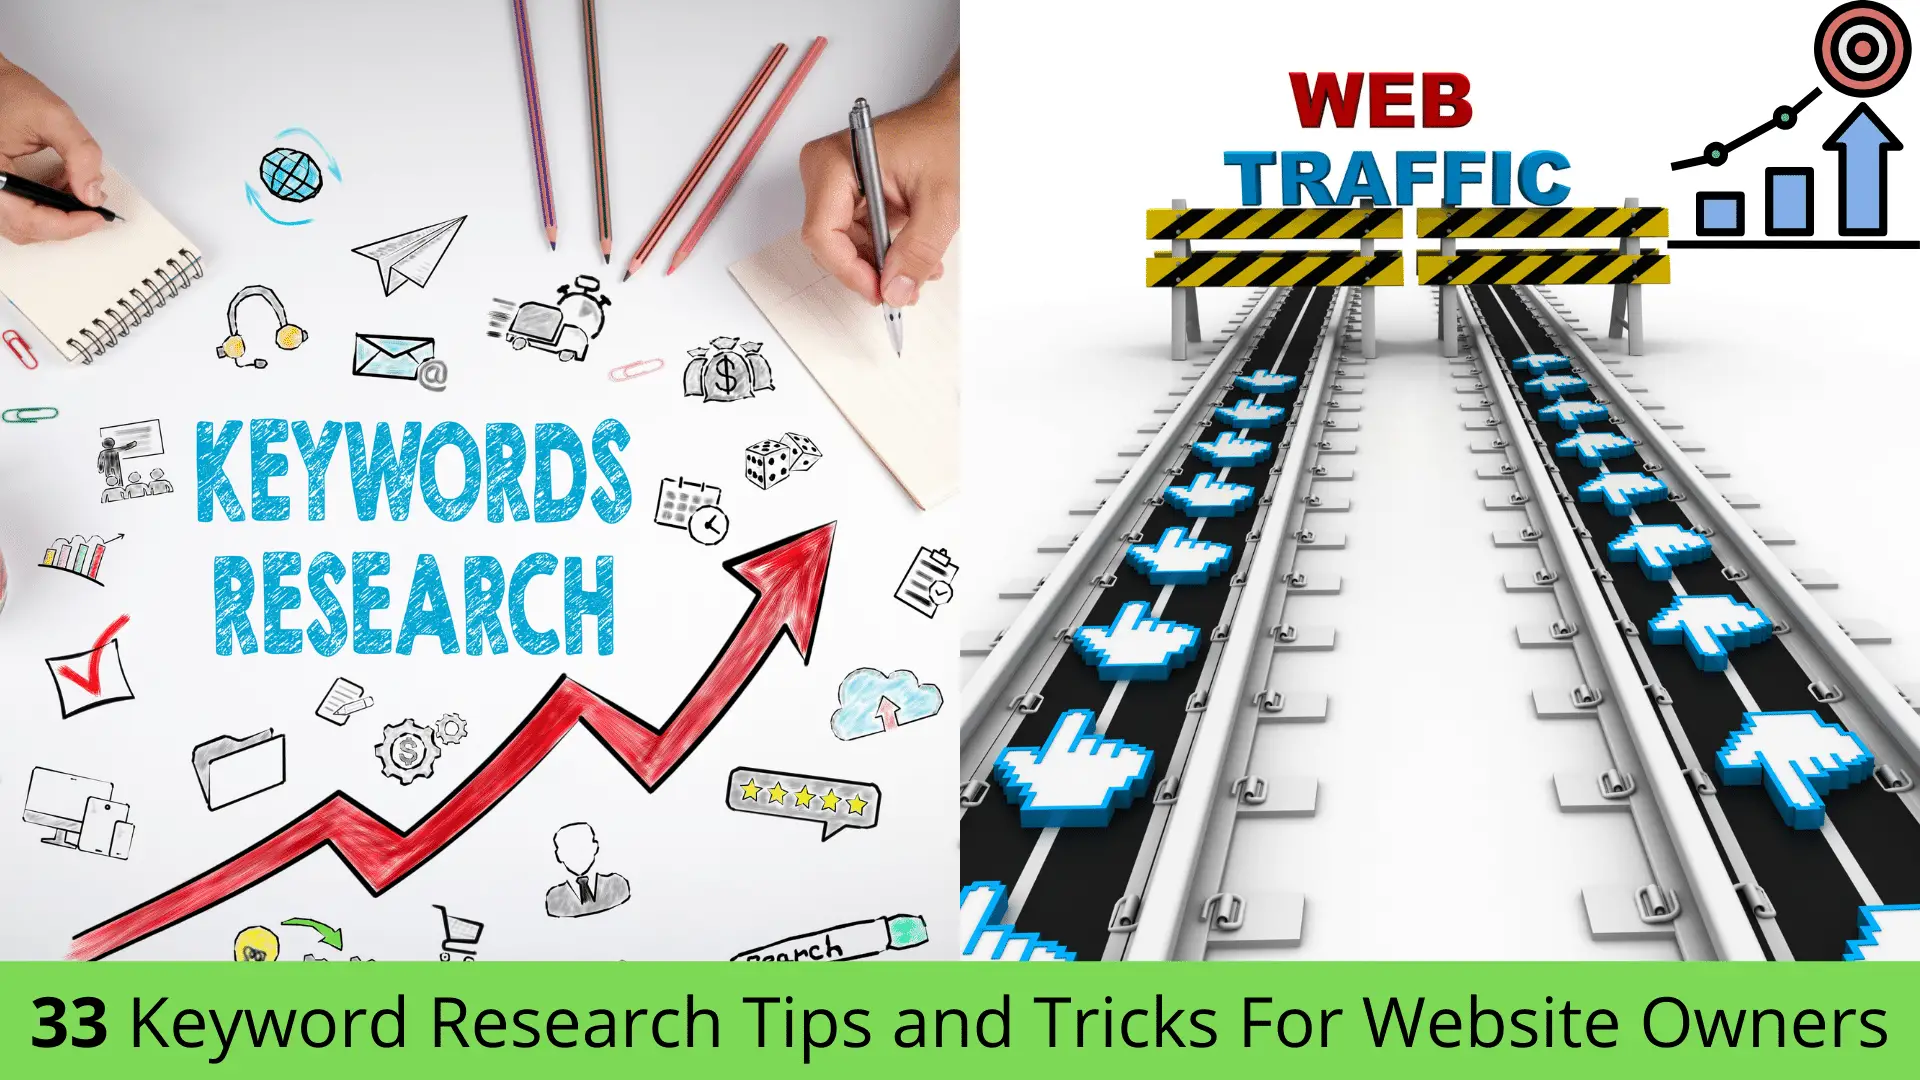 33 Keyword Research Tips and Tricks For Website Owners